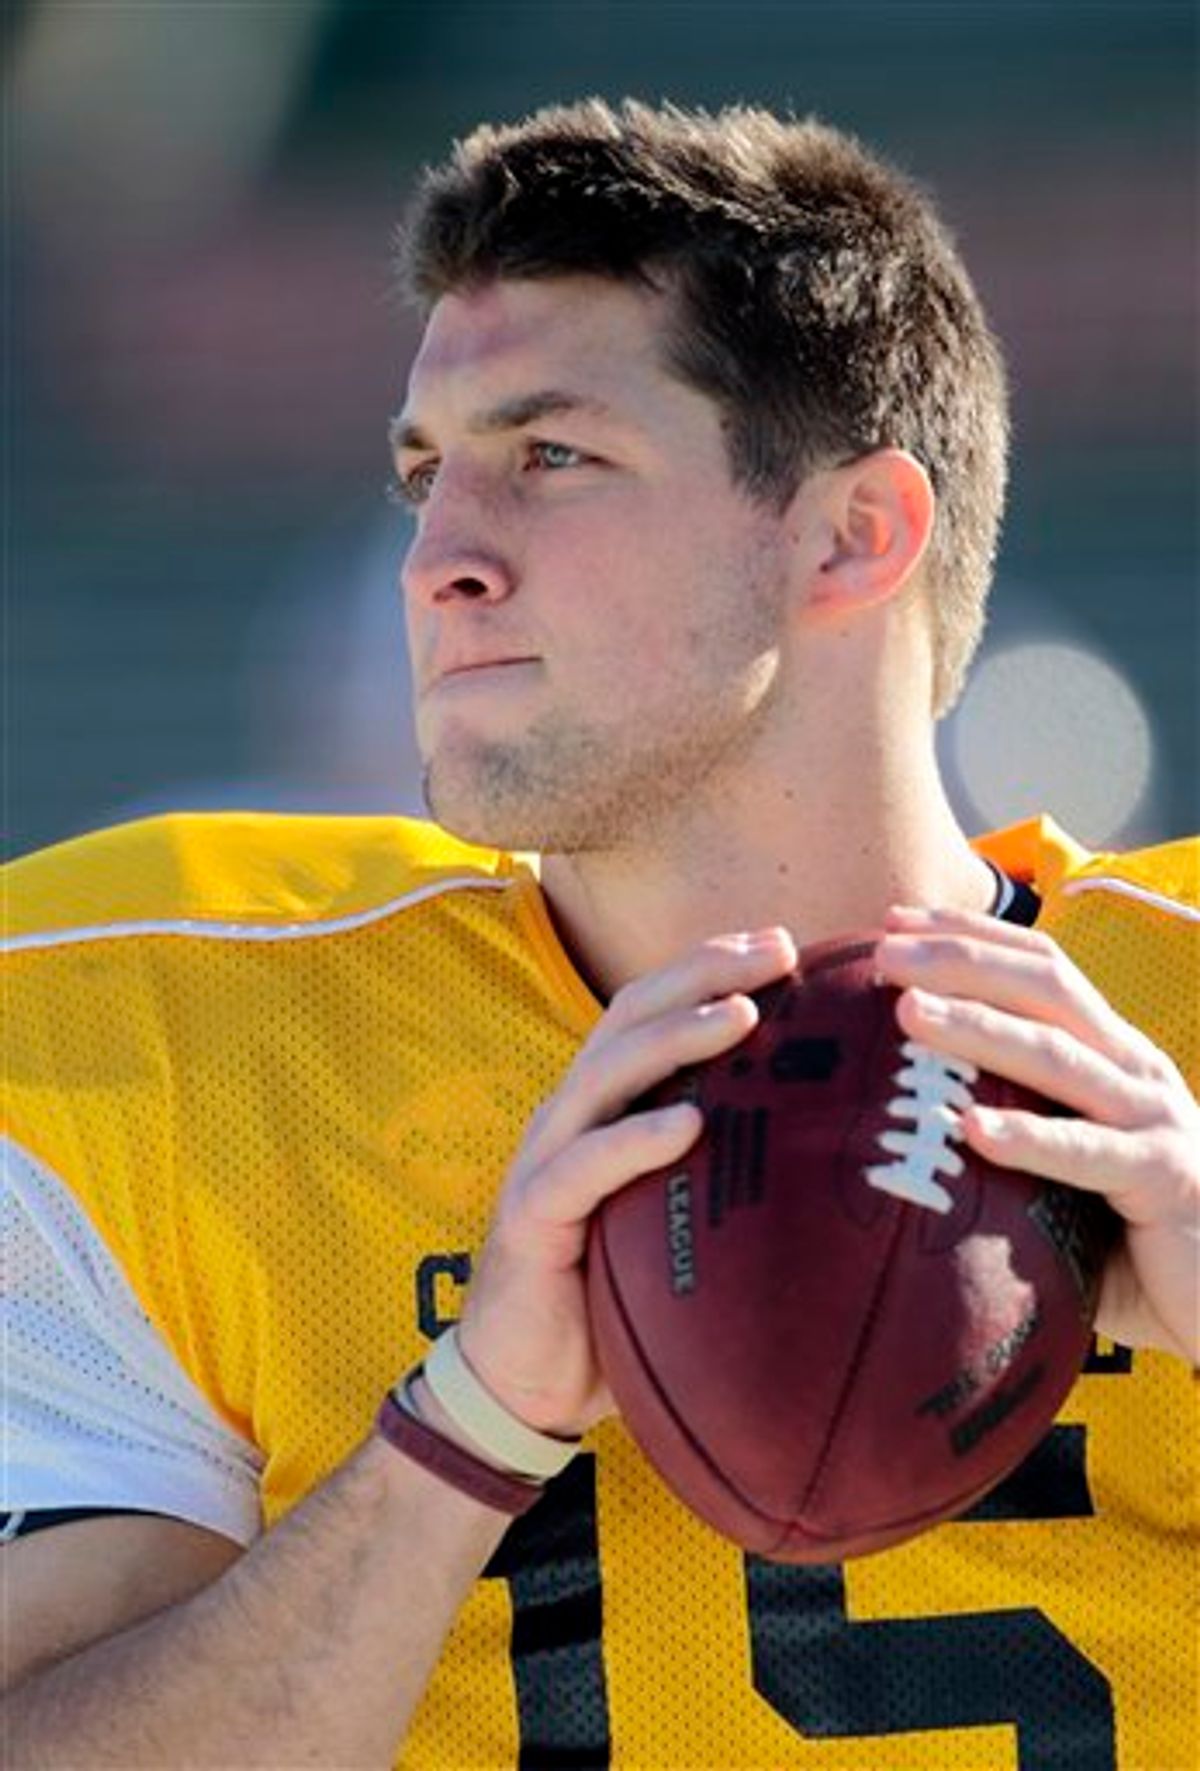 South squad quarterback Tim Tebow, of Florida, throws during practice for the NCAA college football Senior Bowl game, on Tuesday Jan. 26, 2010,  in Mobile, Ala.. (AP Photo/Dave Martin)   (AP)